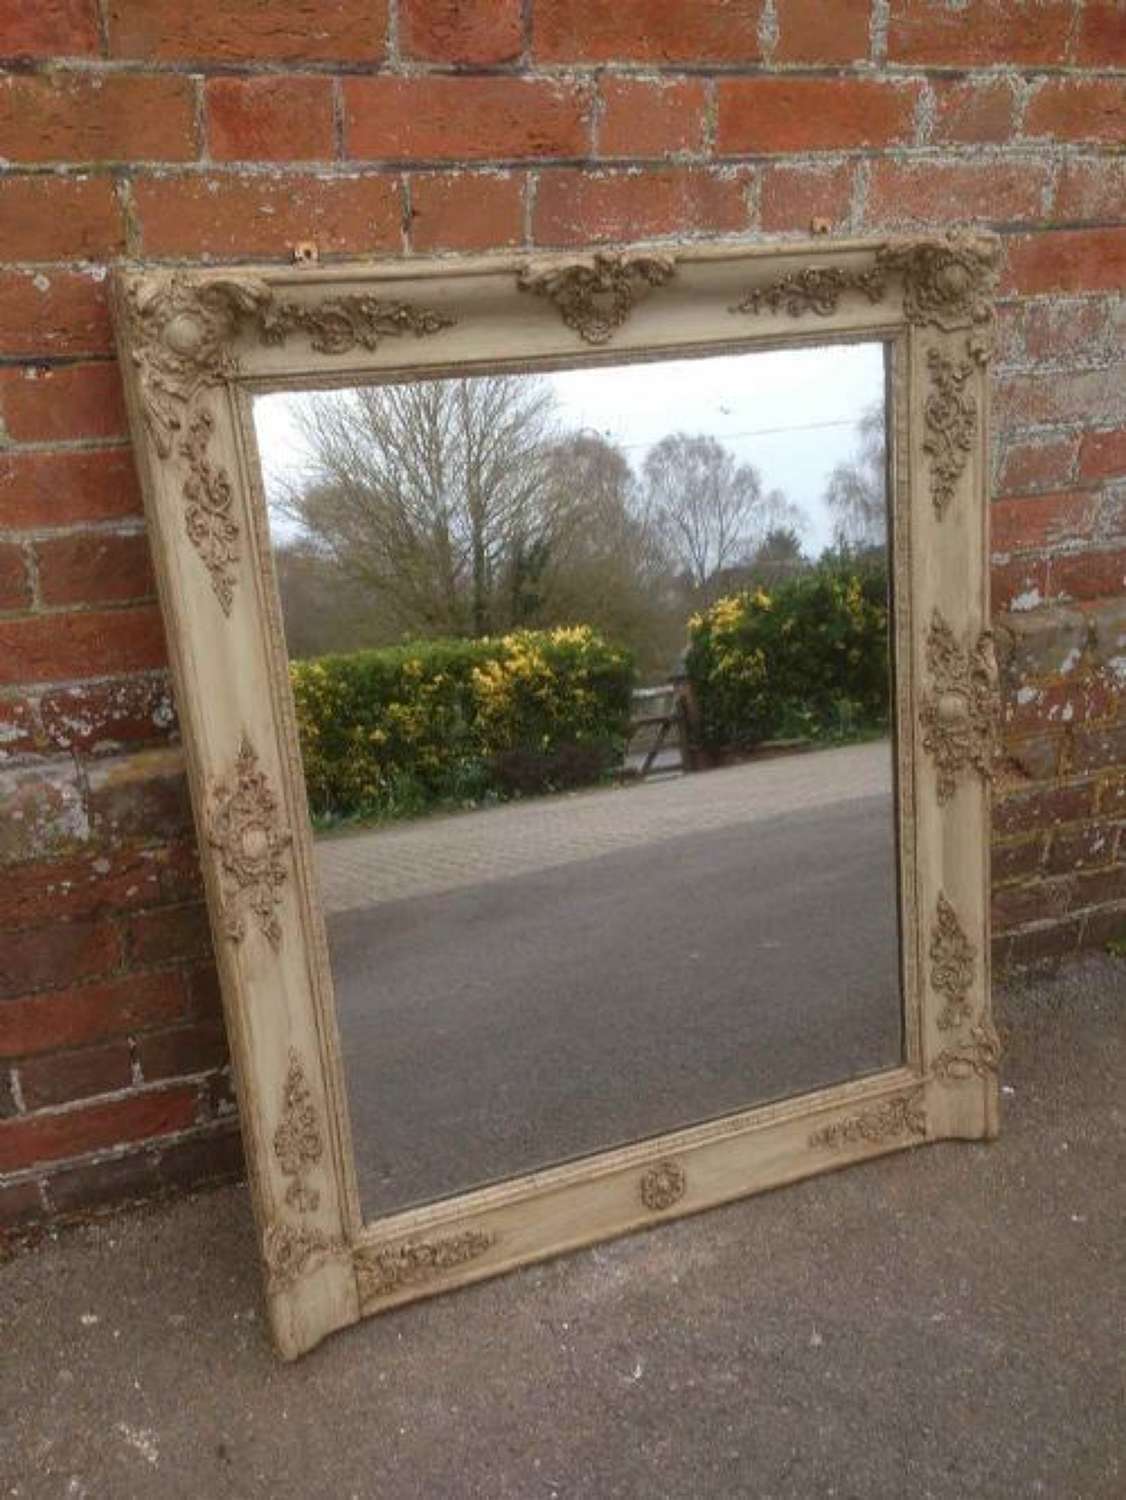 Early French Antique 19th Century Louis Phillipe Overmantal Mirror.